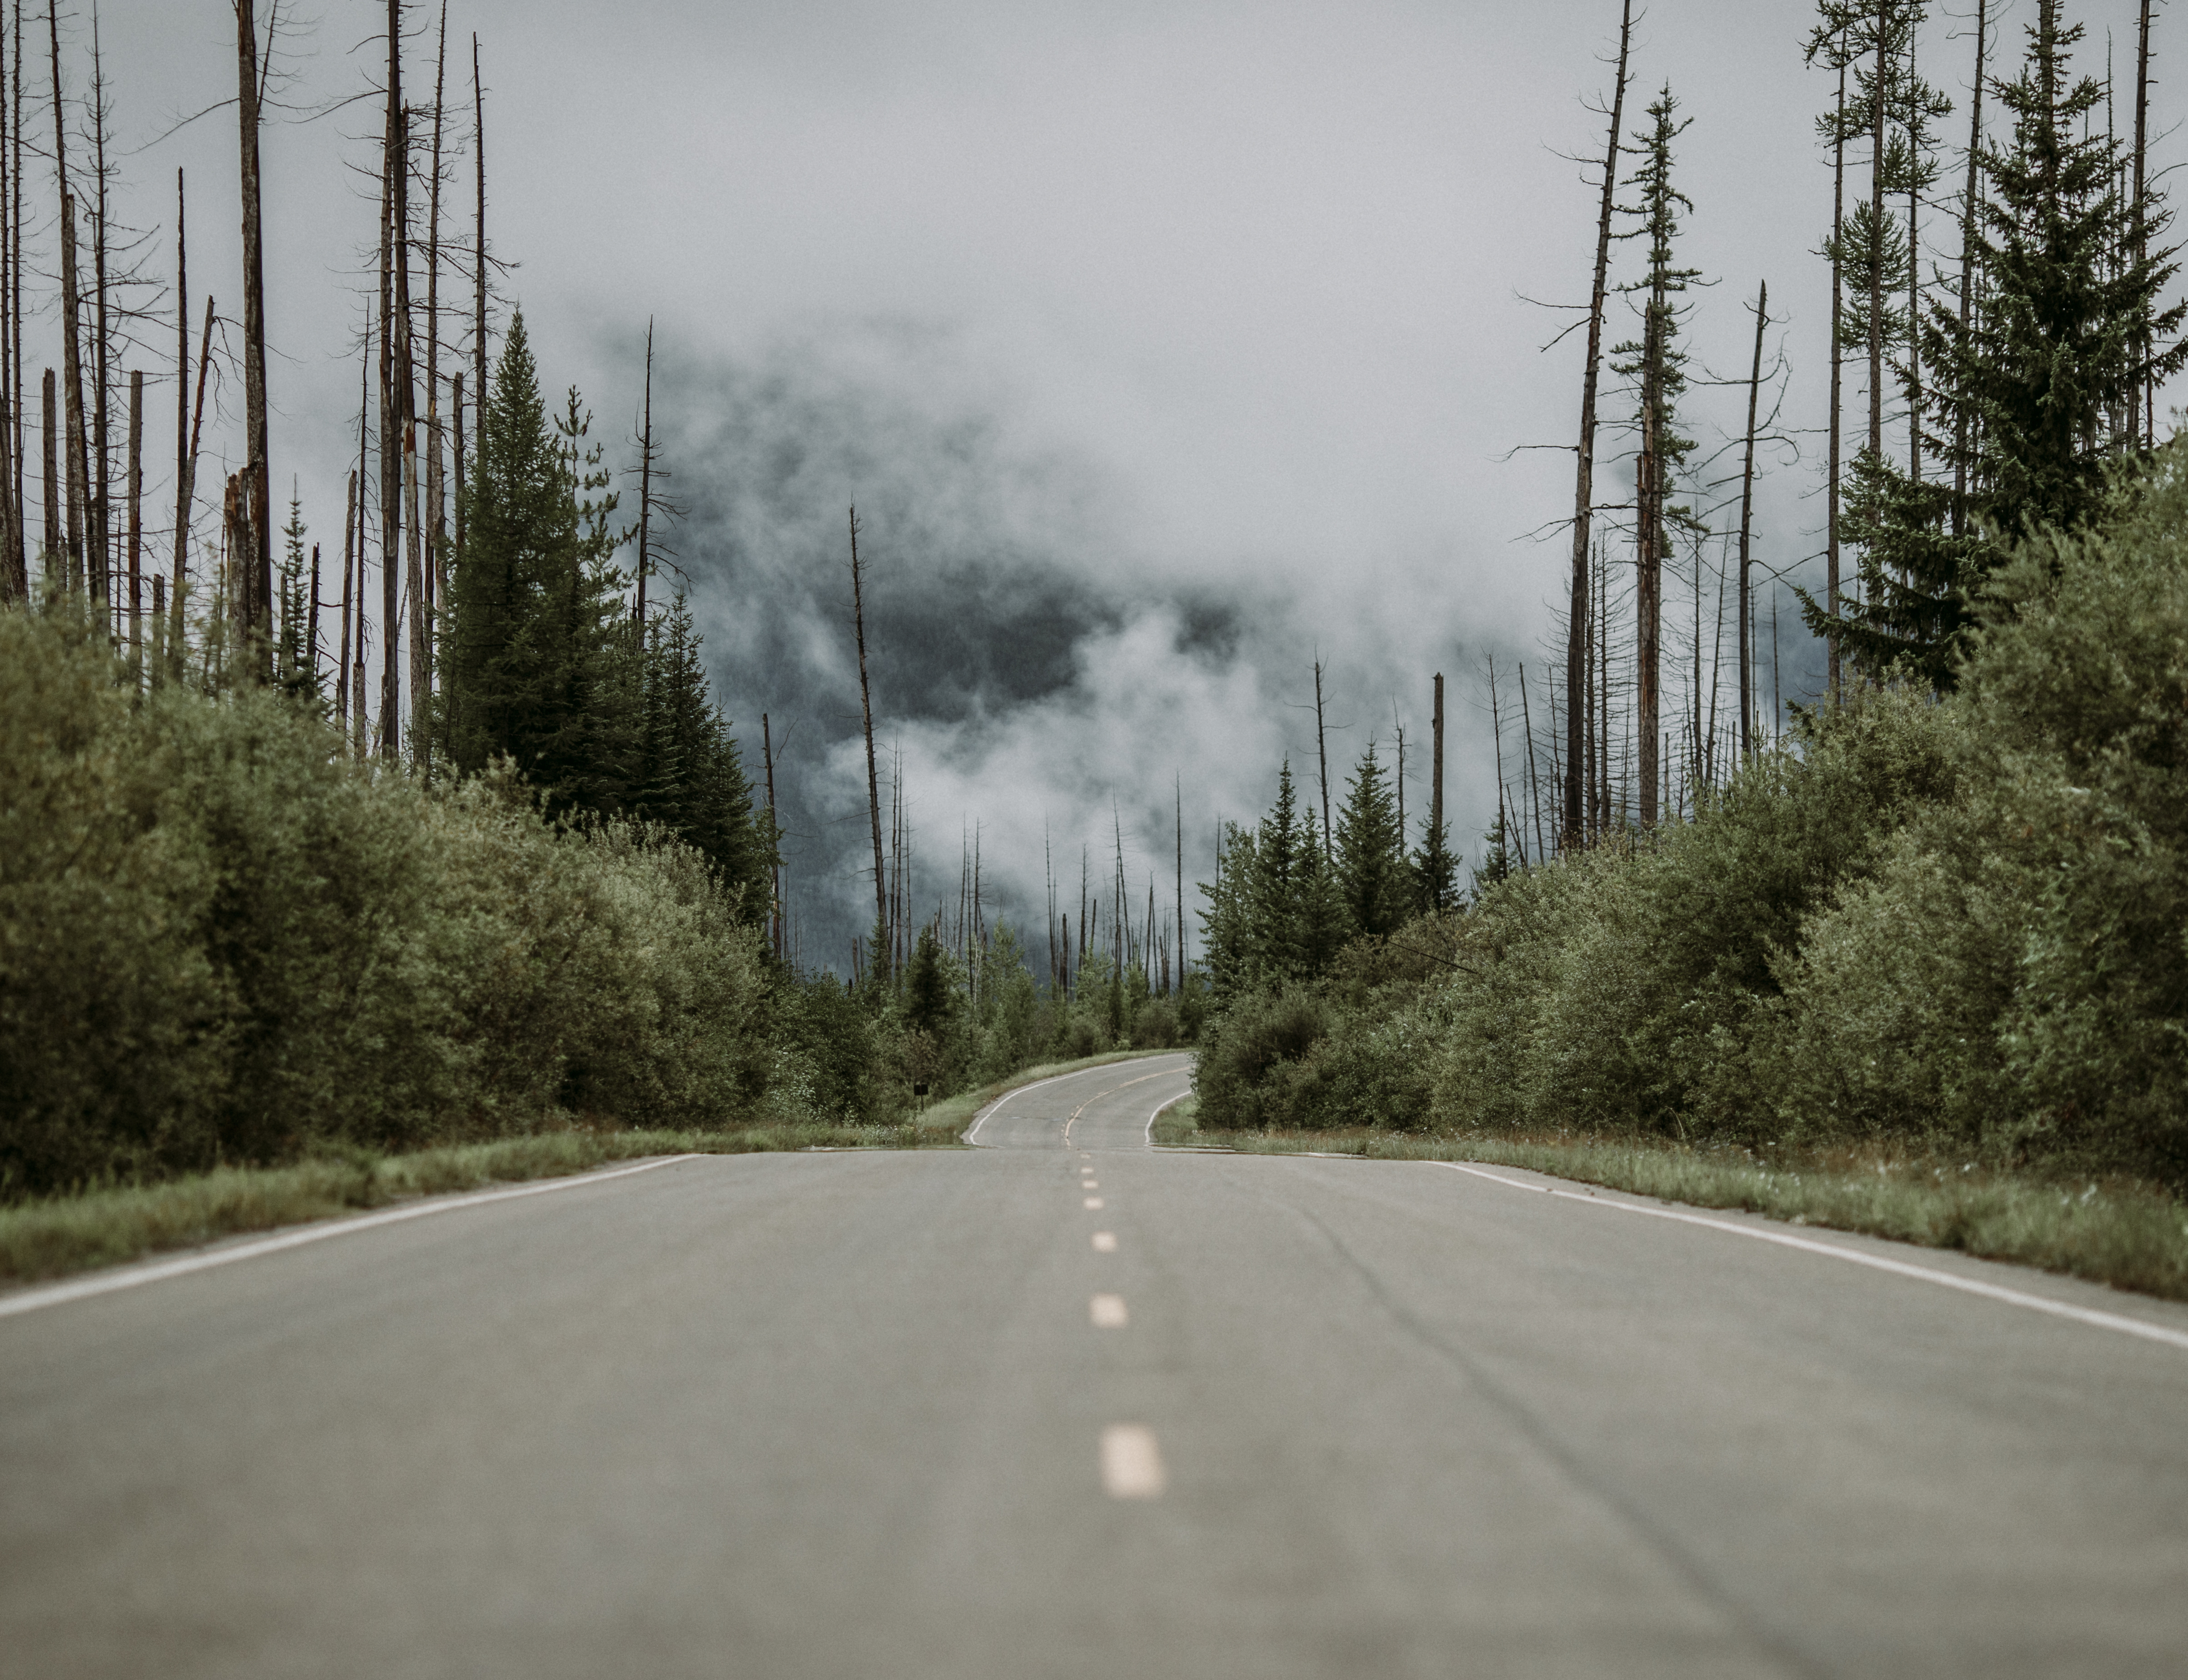 Paved road through a forest recovering from wildfire on cloudy day